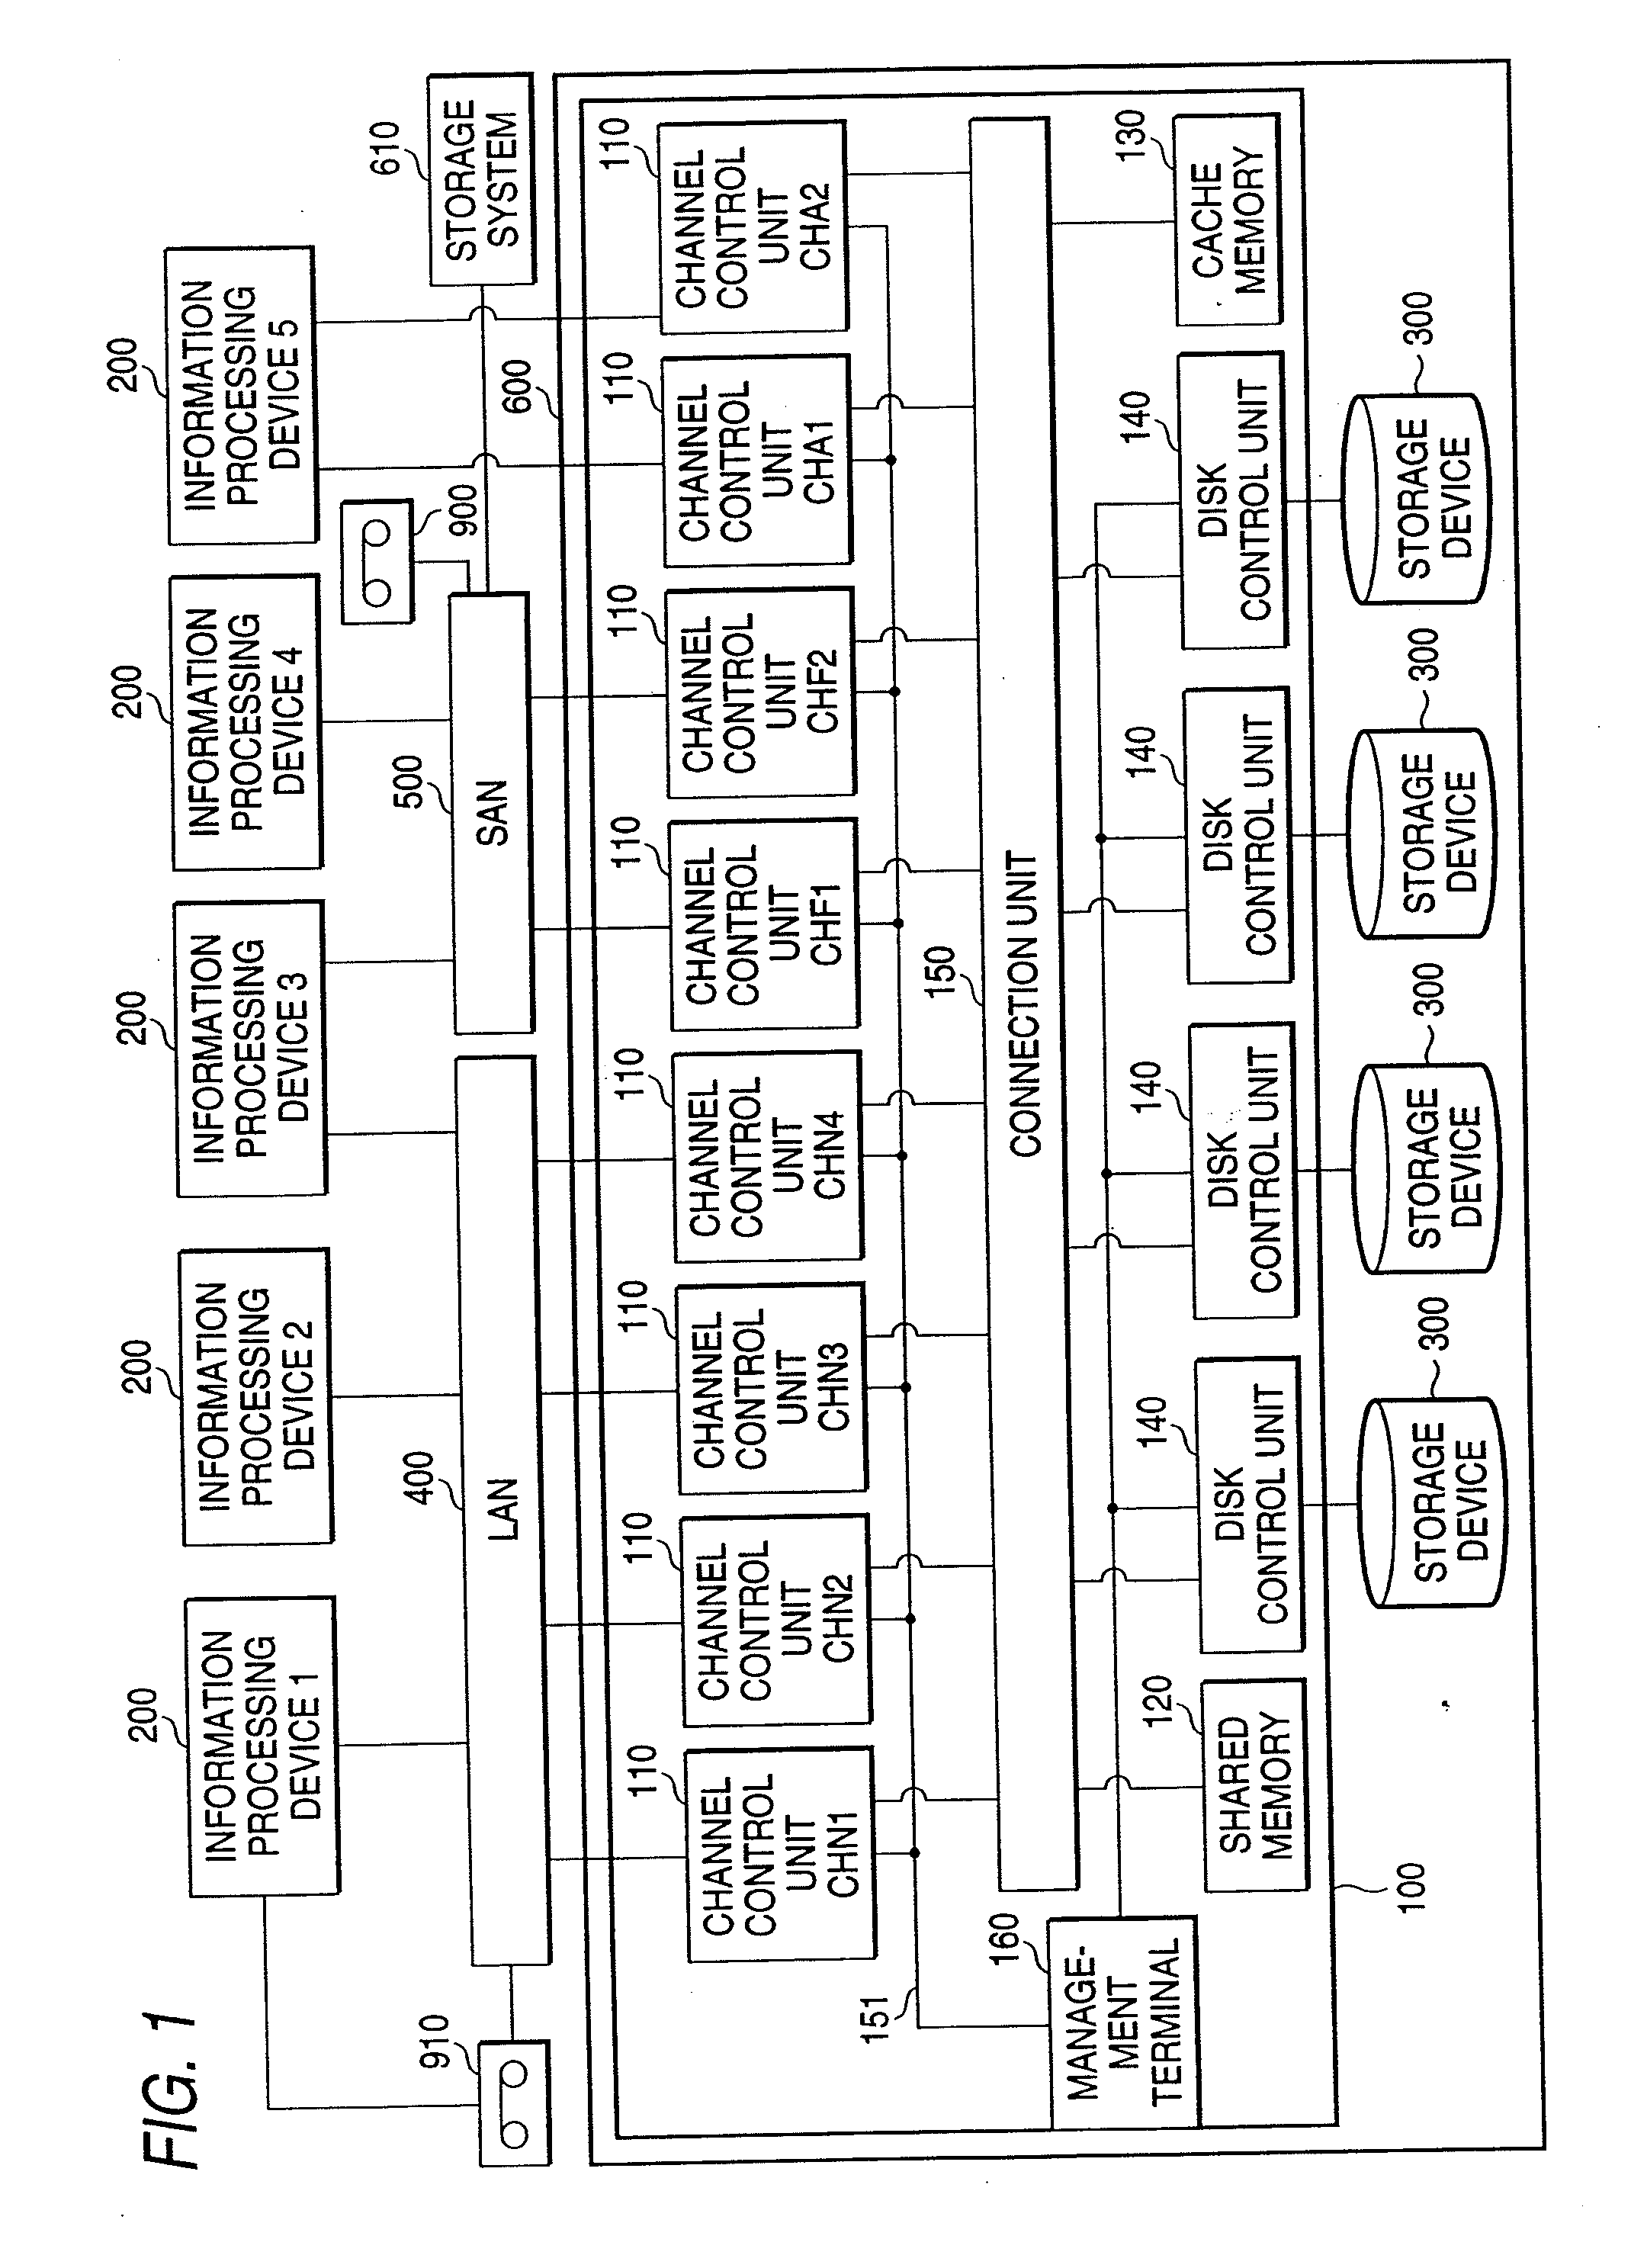 Arrangements which write same data as data stored in a first cache memory module, to a second cache memory module